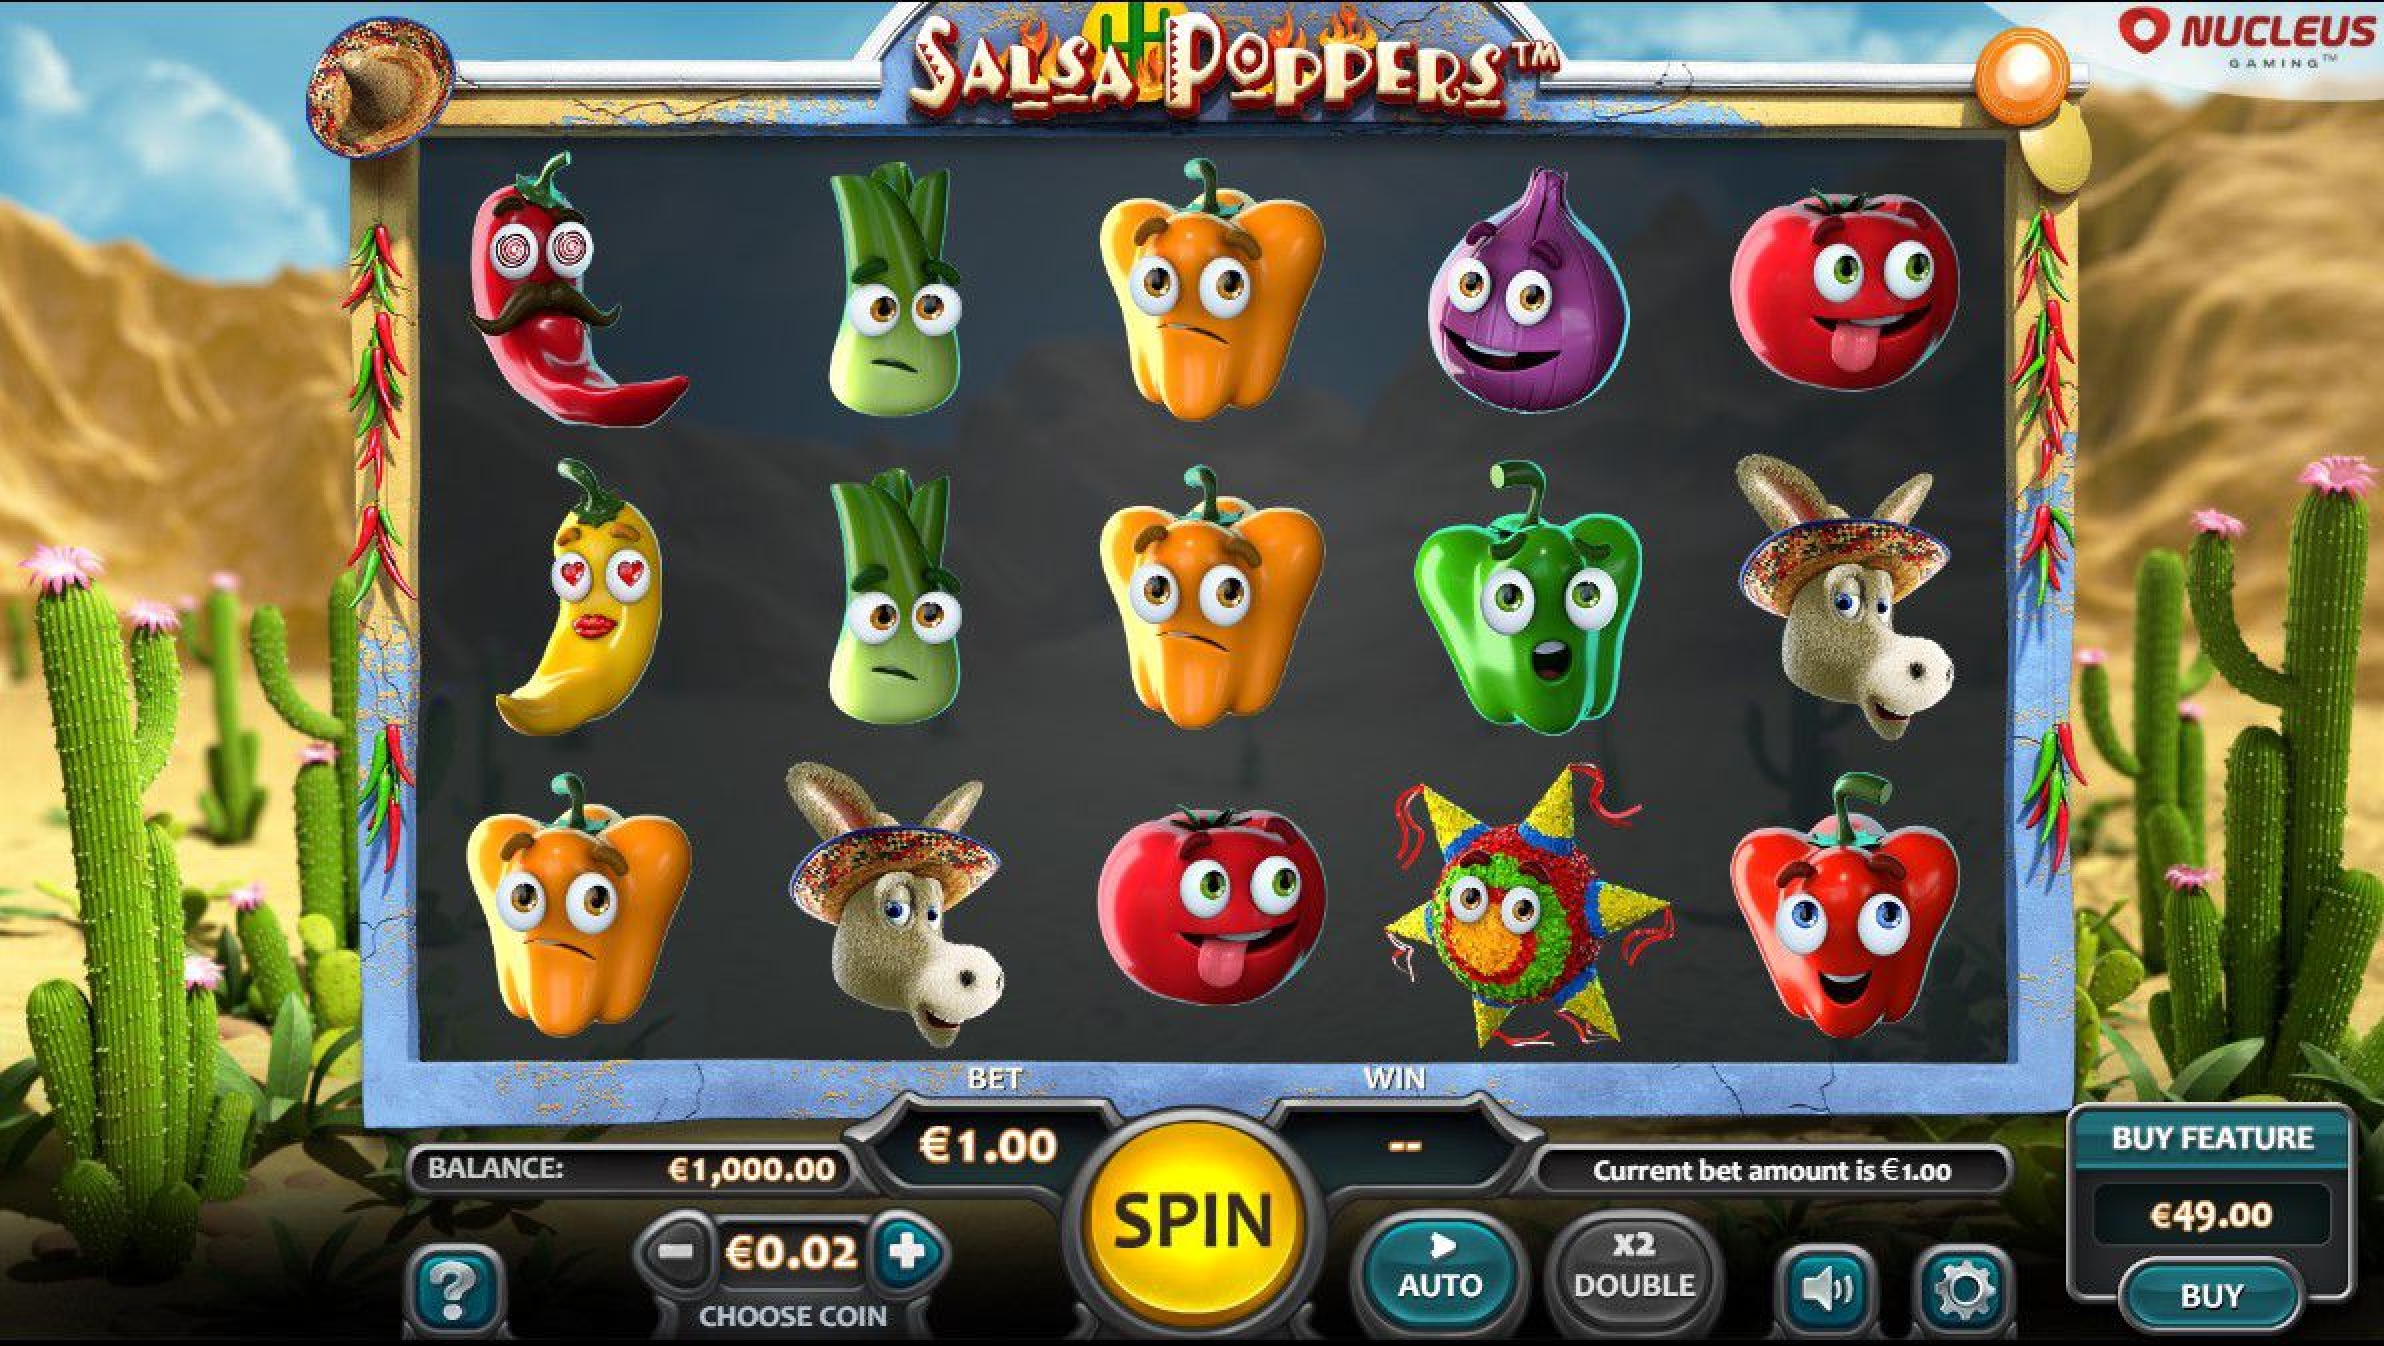 The Salsa Poppers Online Slot Demo Game by Nucleus Gaming